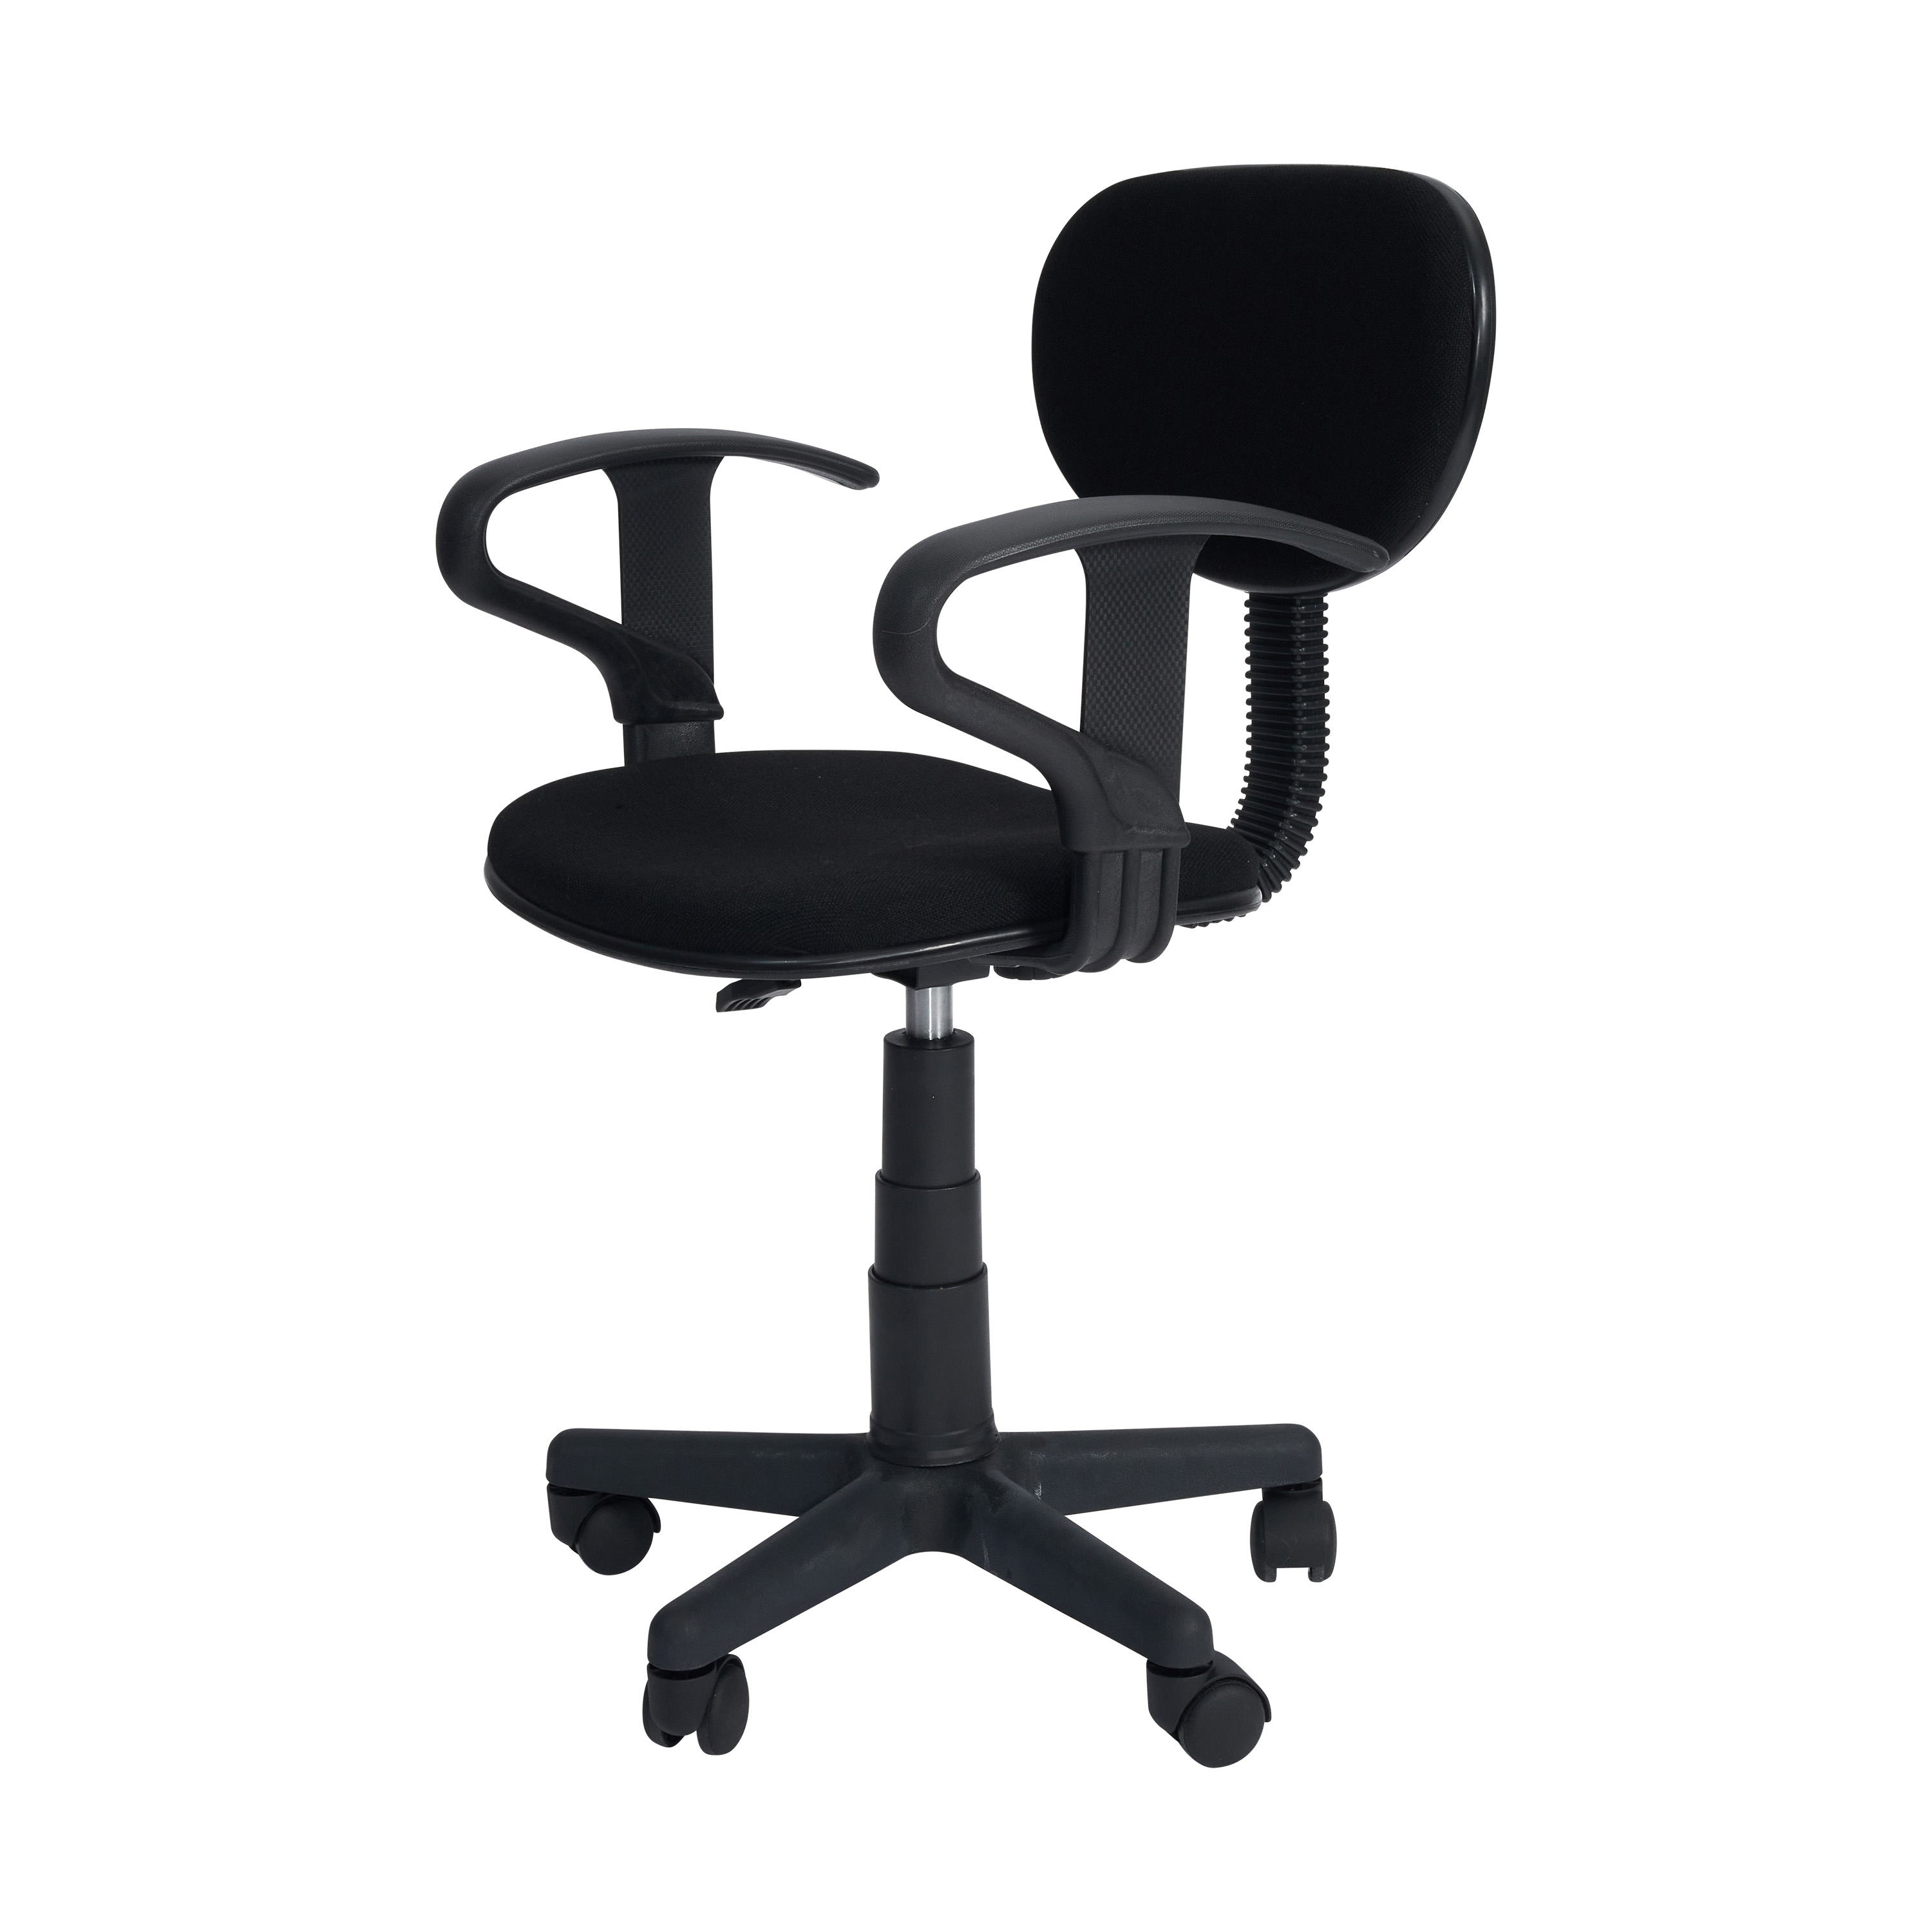 Student Task Chair with Arms, Multiple Colors - image 4 of 11